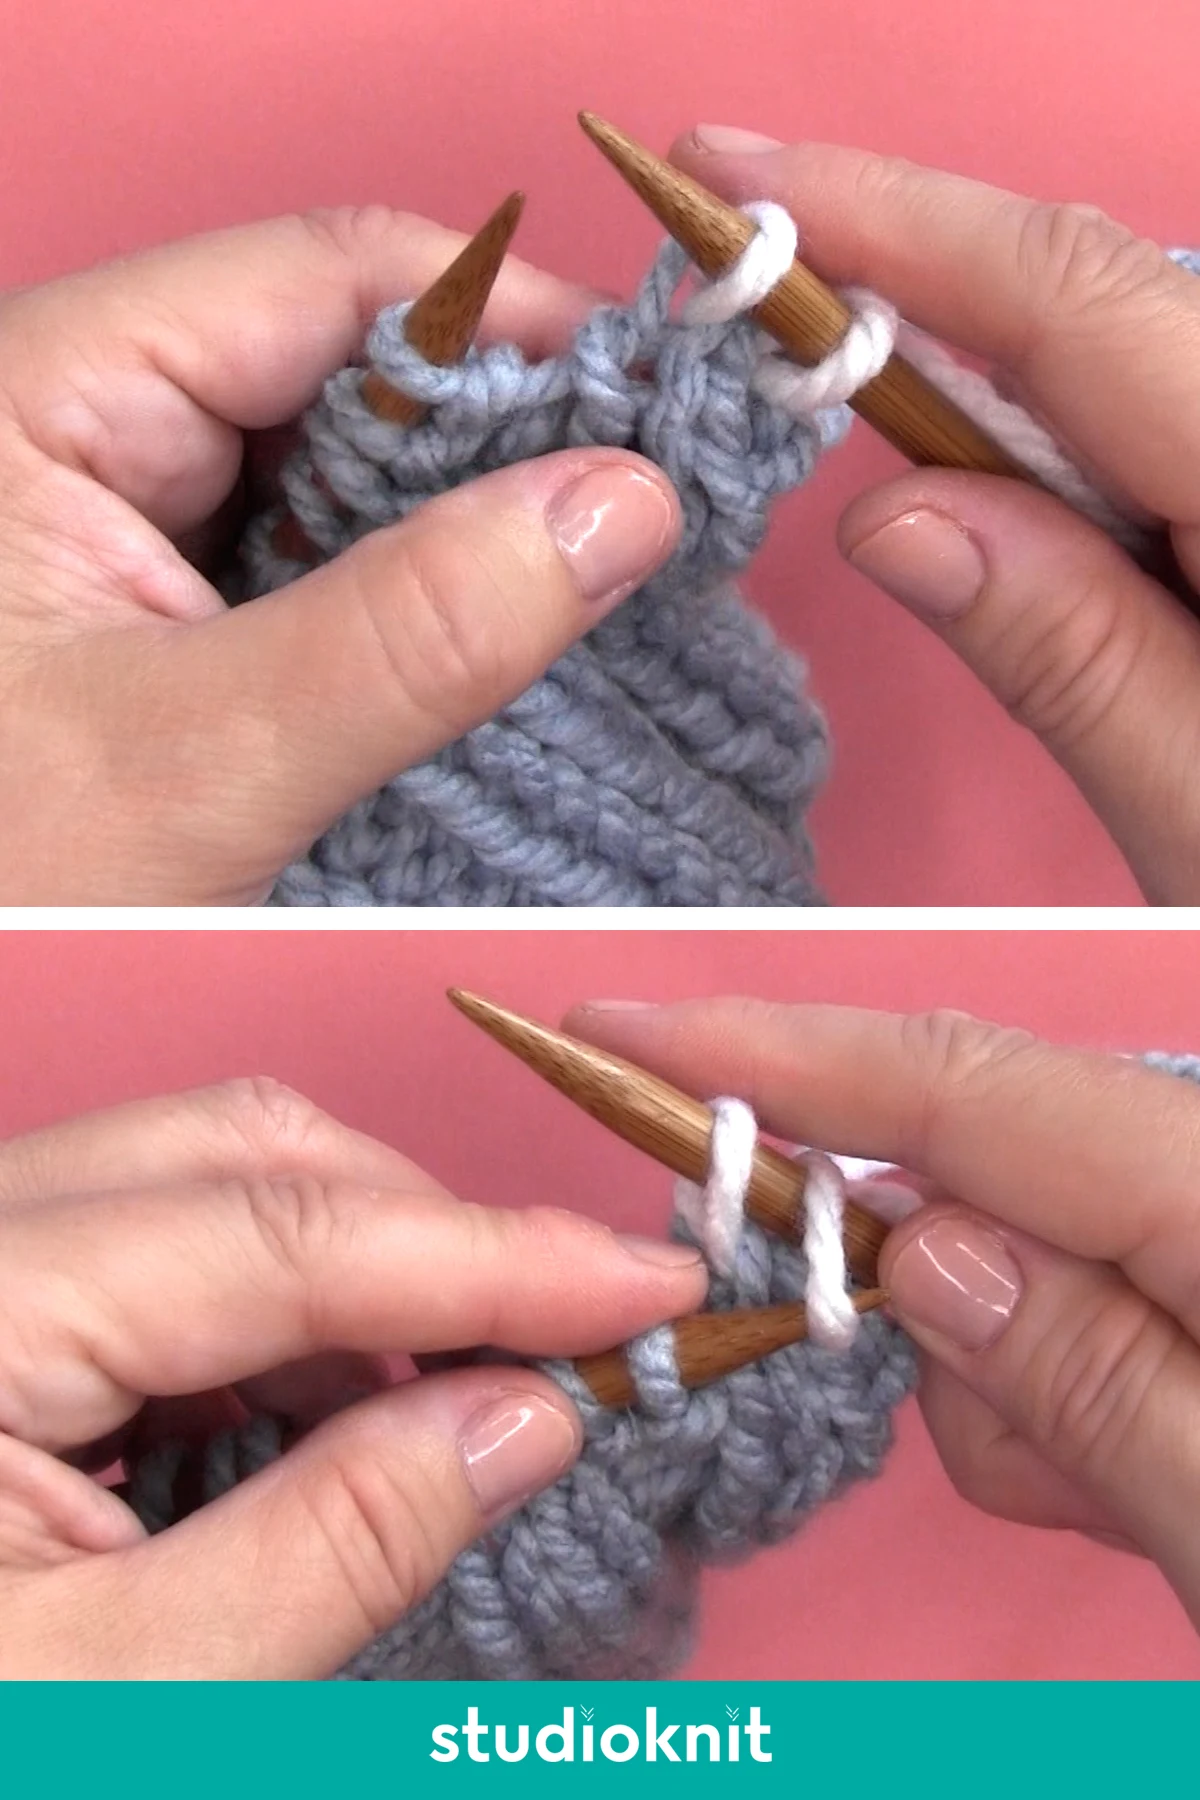 Demonstration of casting off knitwise with hands, yarn, and knitting needles.